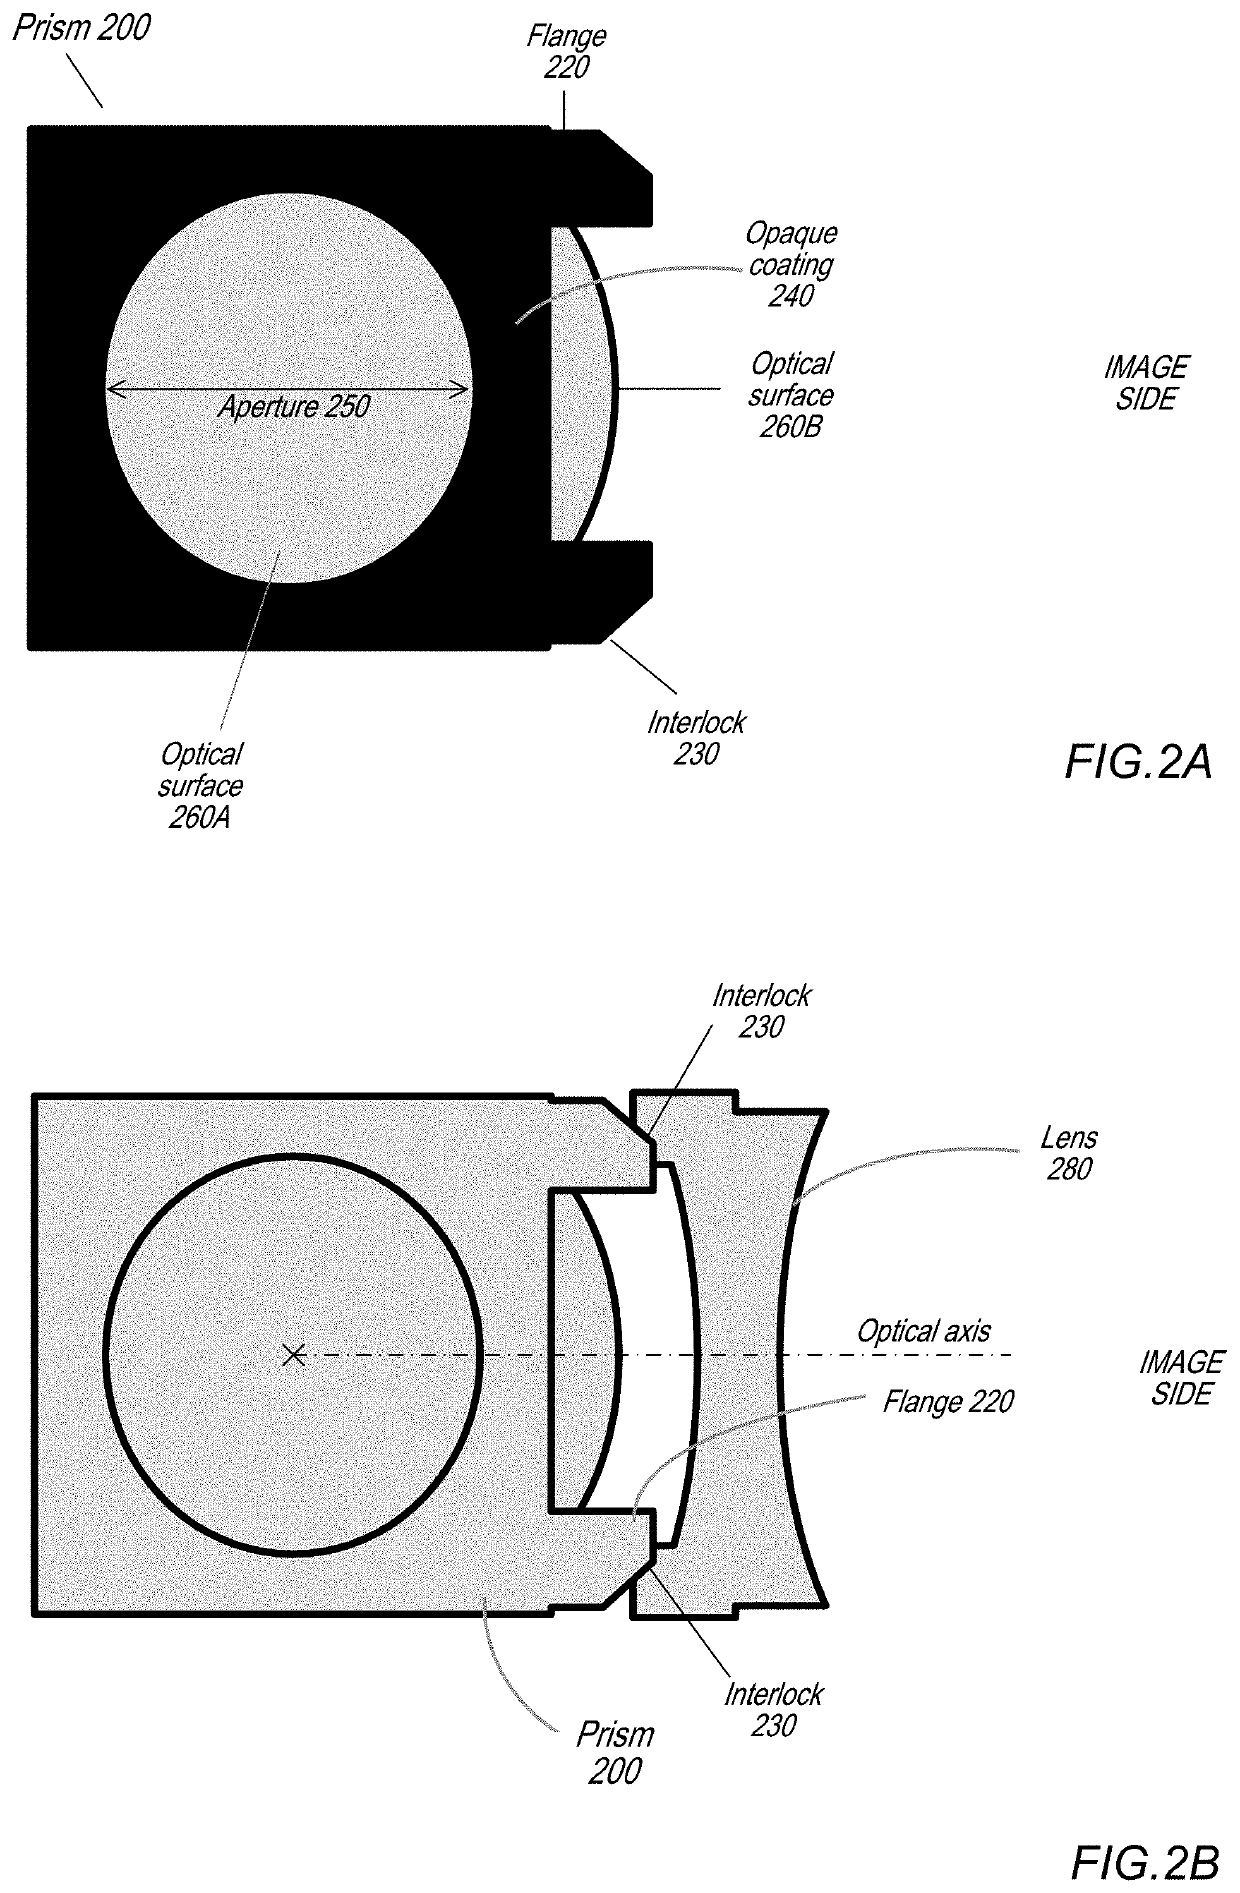 Optical prism with interlock